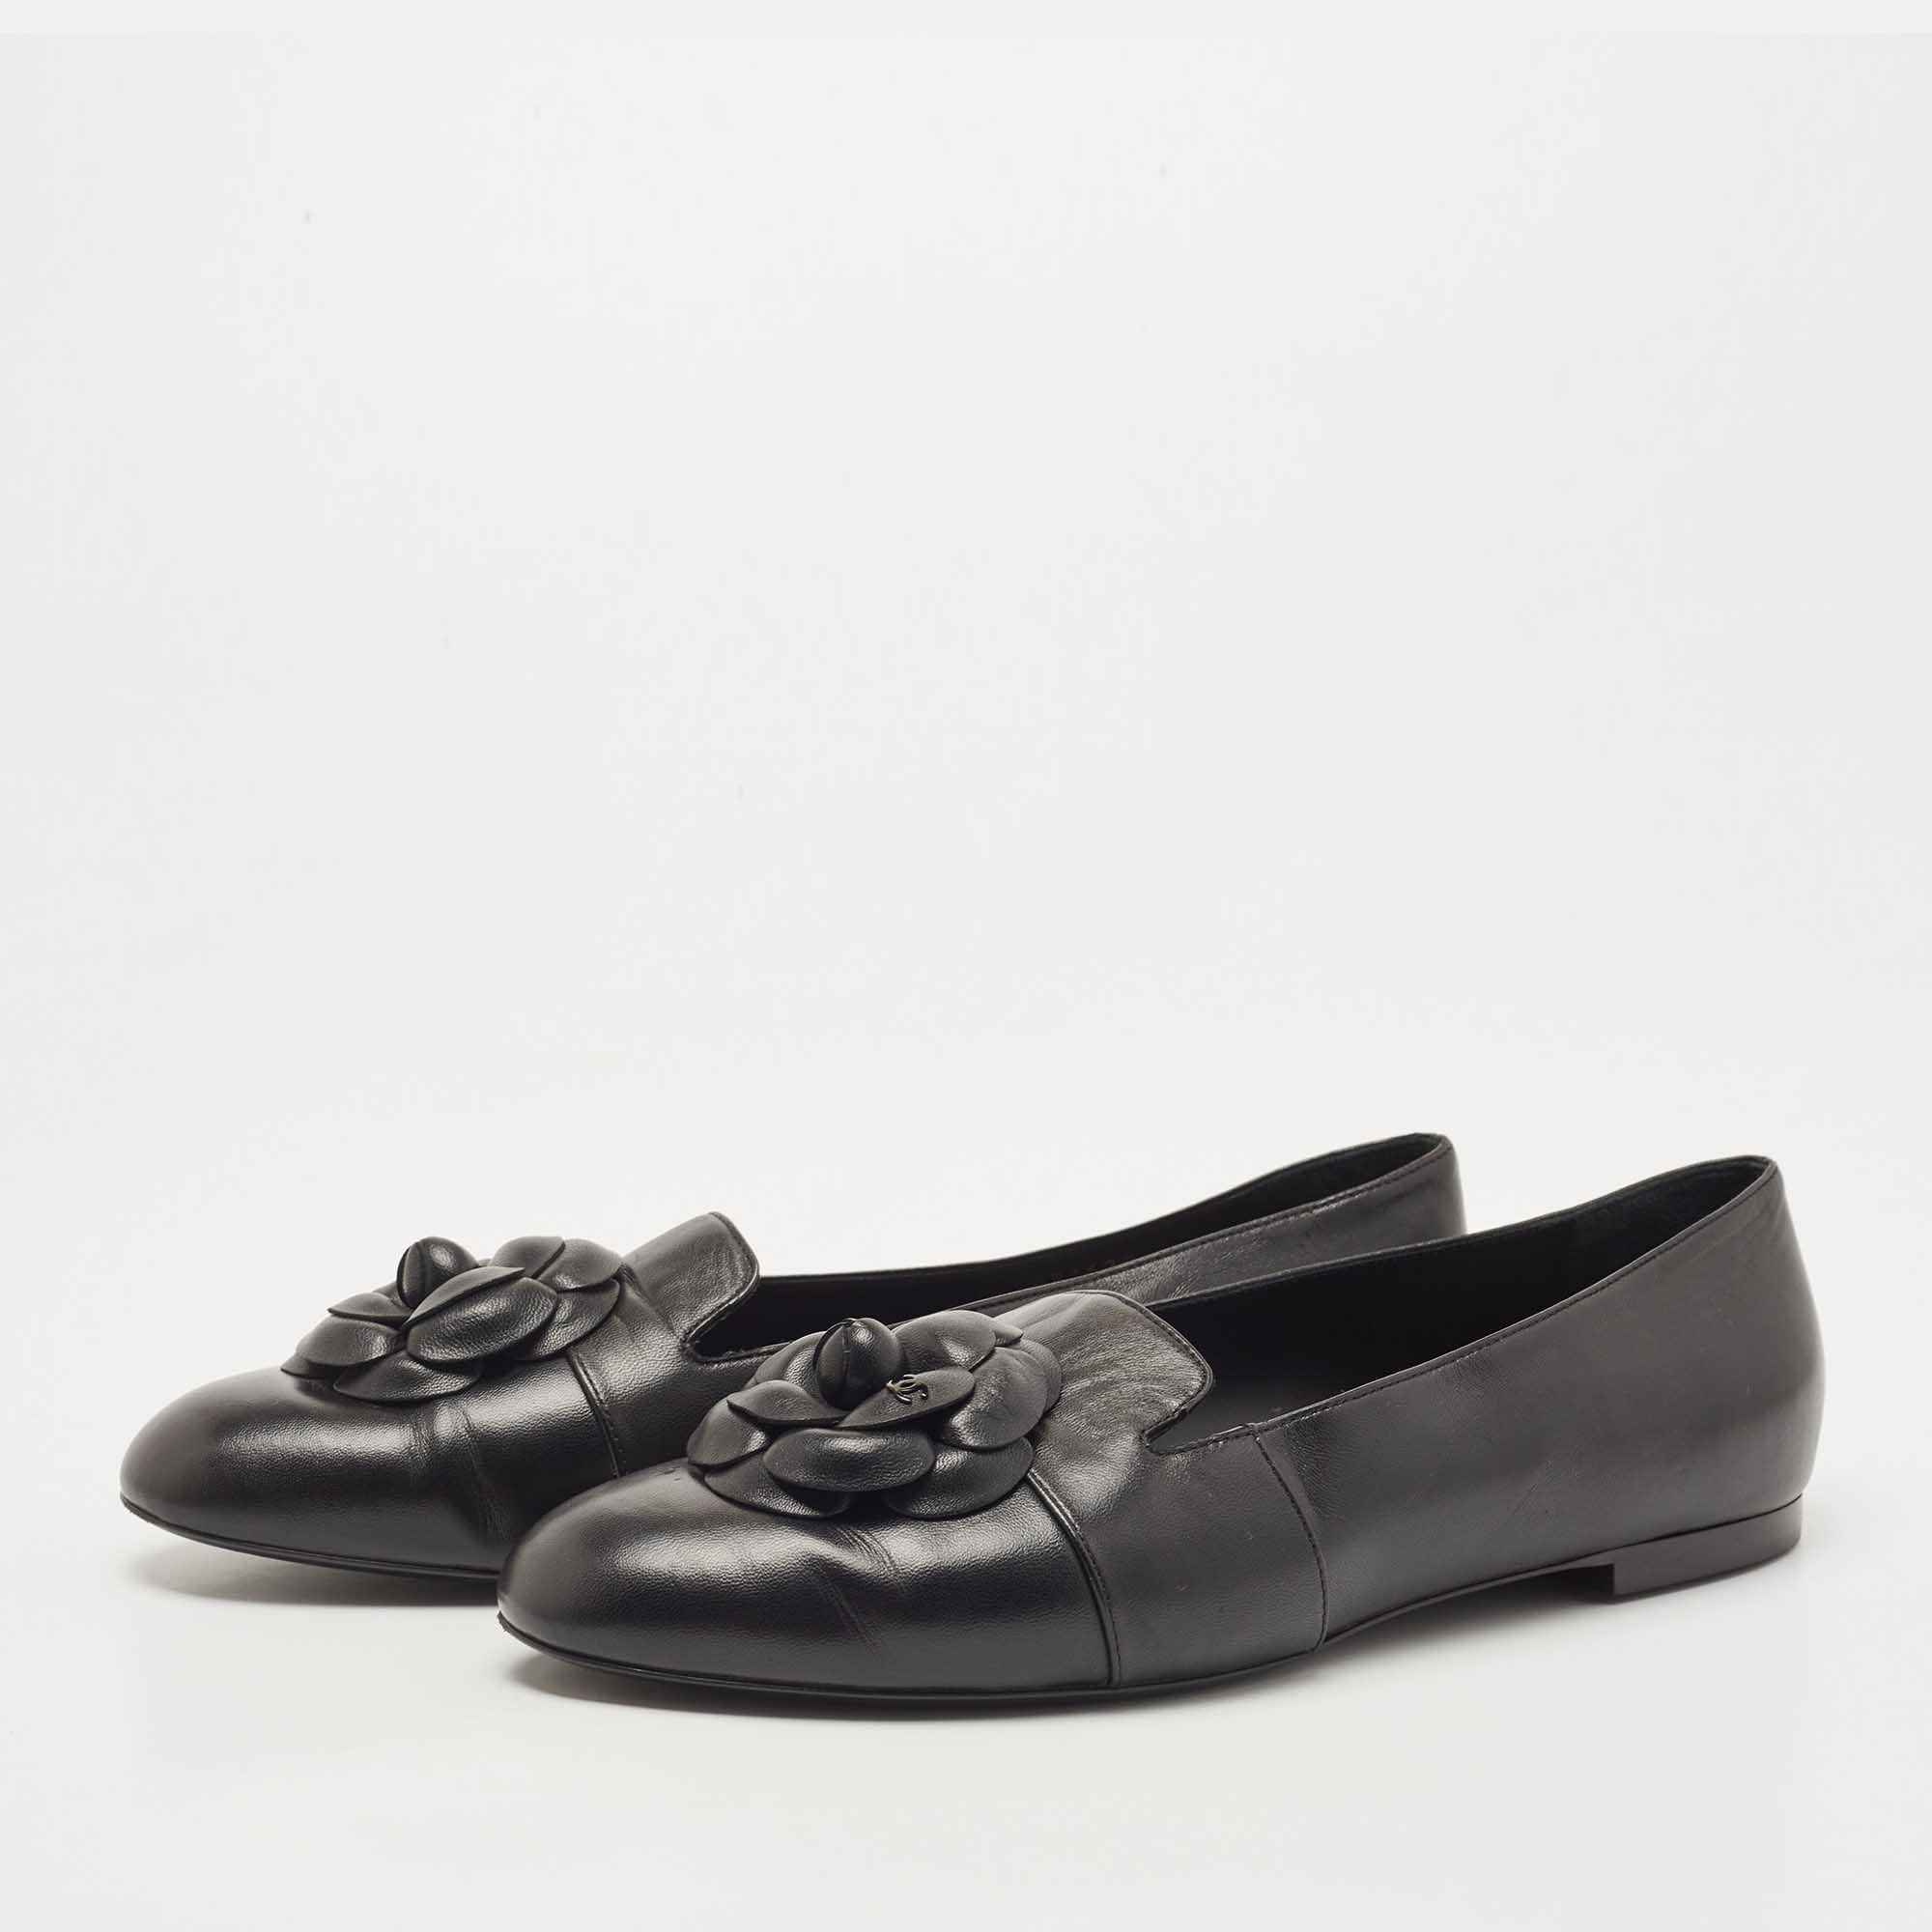 

Chanel Black Leather Camellia Flower CC Slip On Smoking Slippers Size